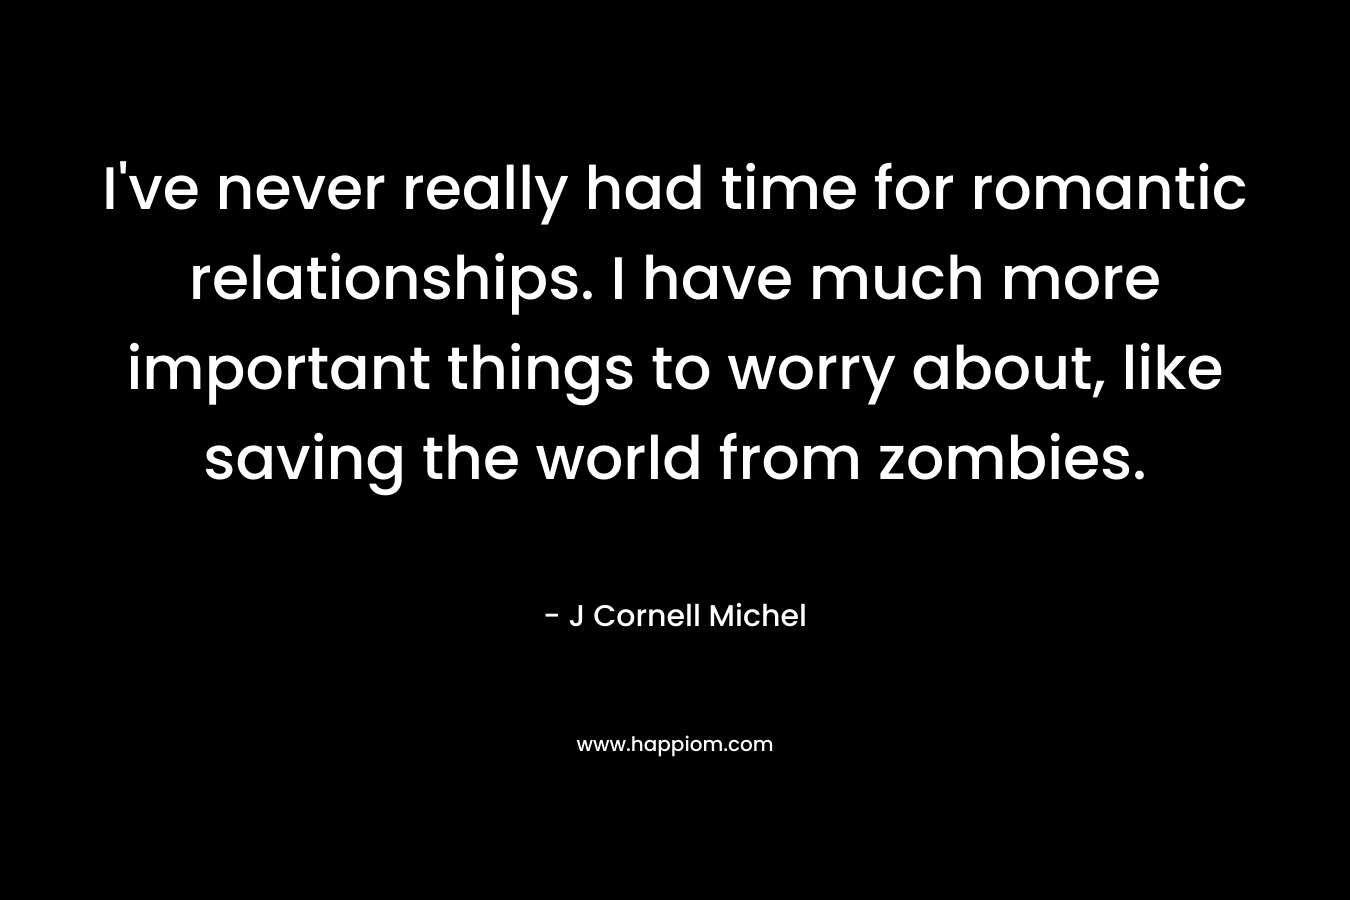 I've never really had time for romantic relationships. I have much more important things to worry about, like saving the world from zombies.